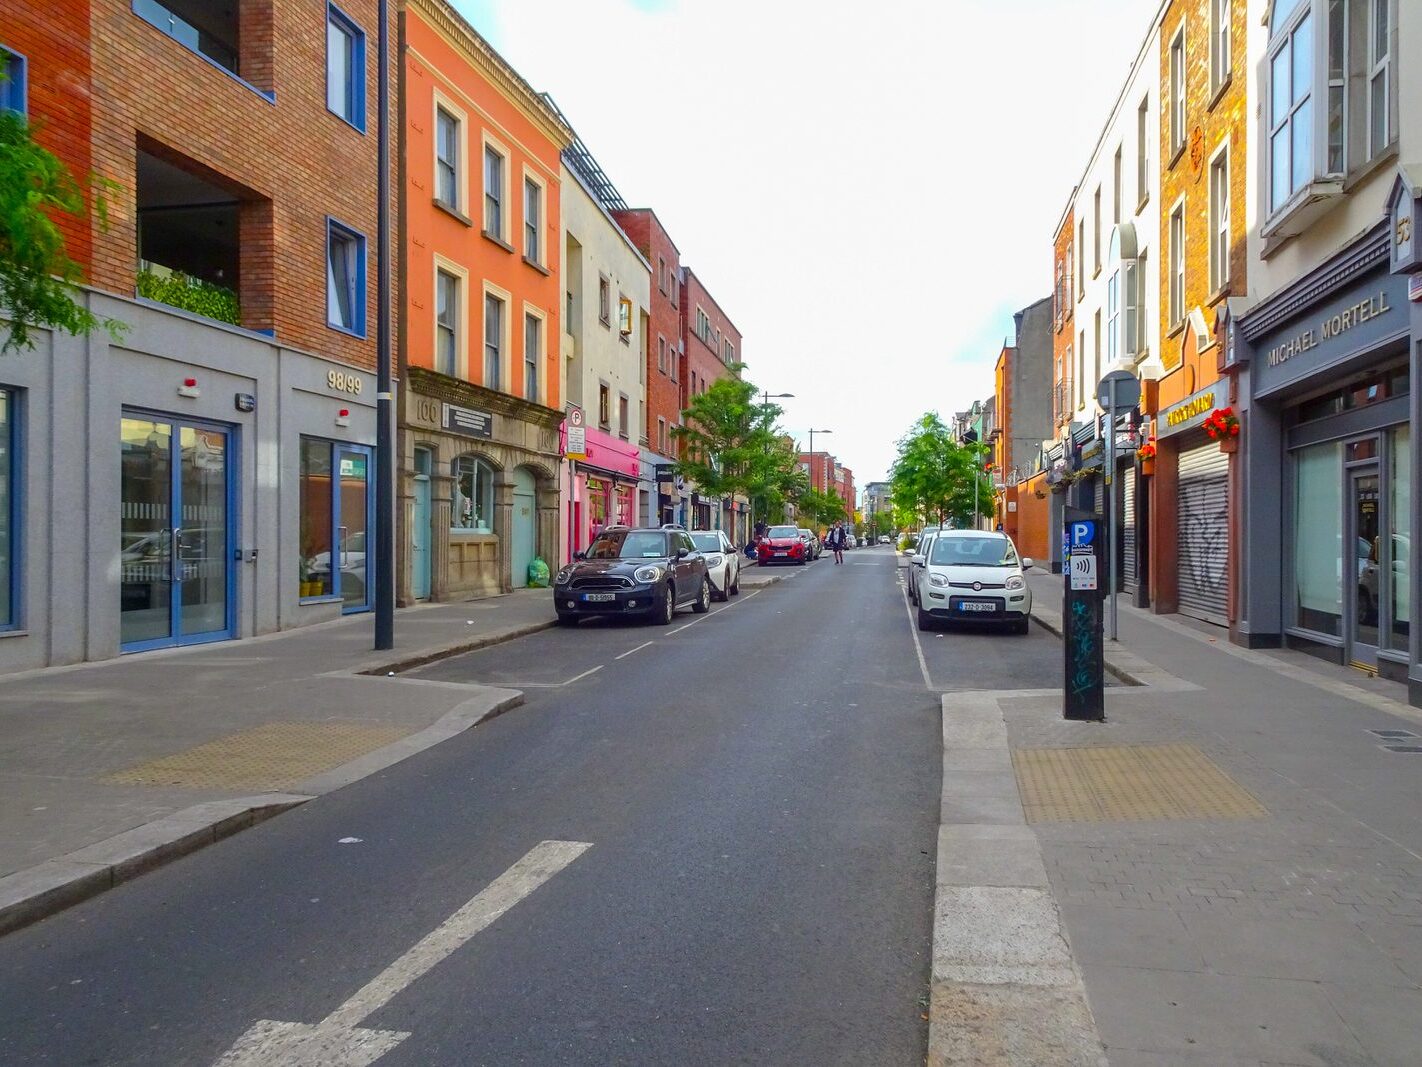 THE FRANCIS STREET UPGRADE HAS BEEN A HUGE A SUCCESS [MEATH STREET IS NEXT FOR AN UPGRADE]-236793-1